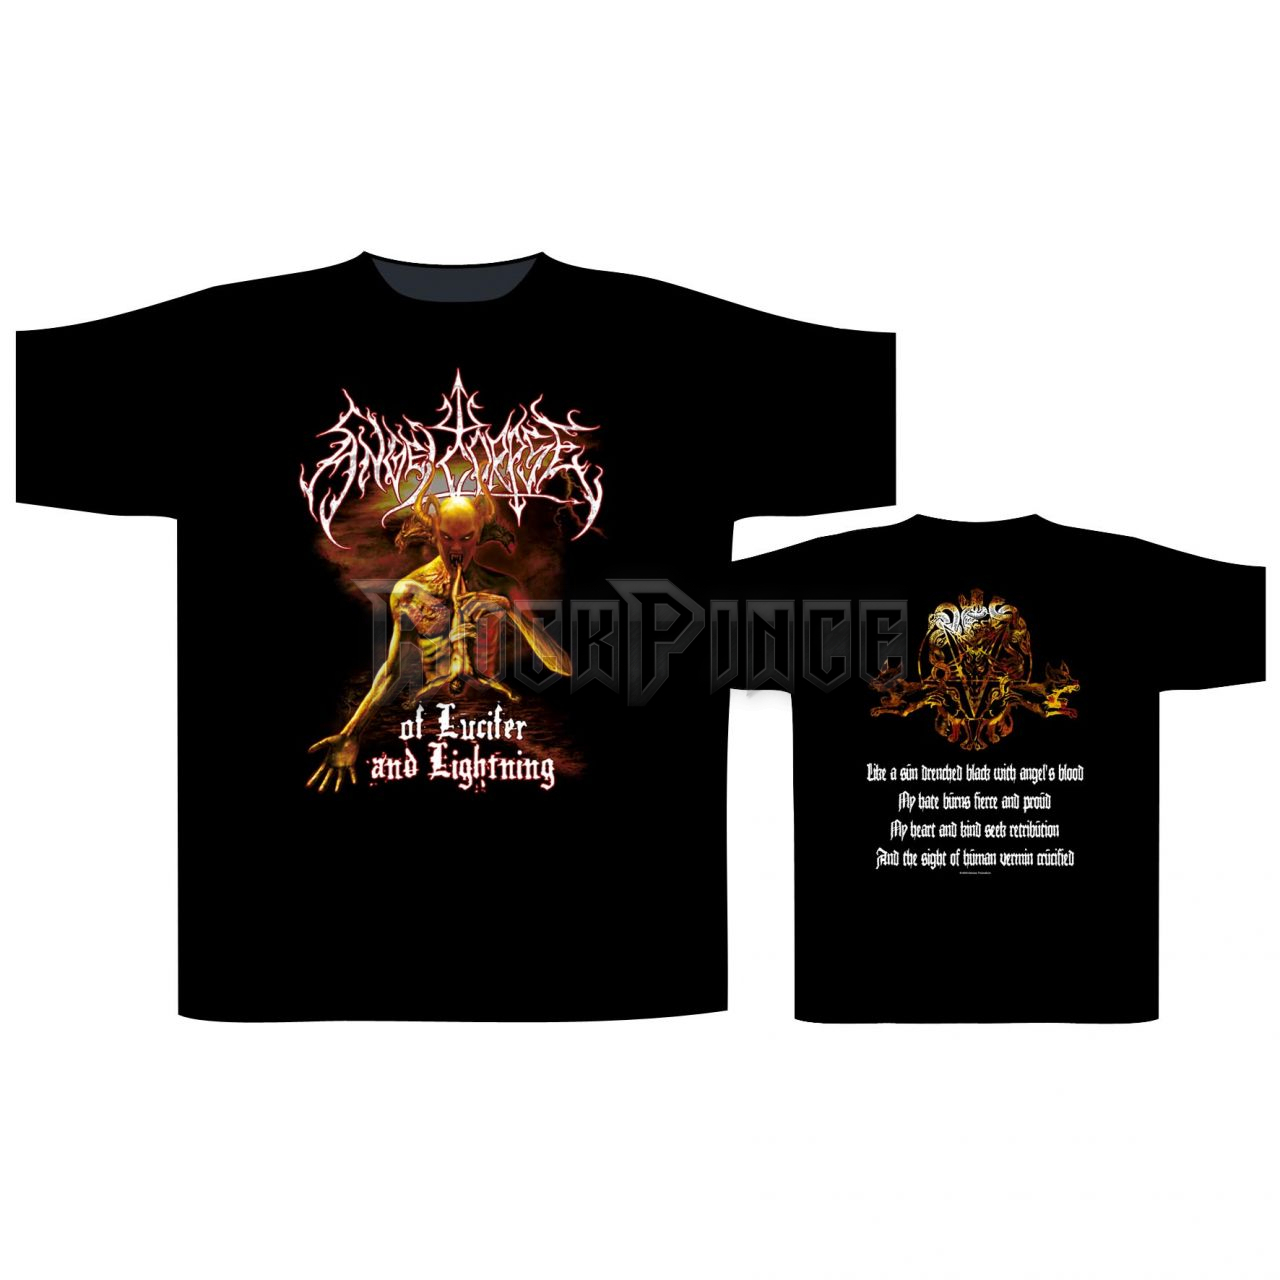 ANGELCORPSE - OF LUCIFER AND LIGHTNING - unisex póló - ST2515